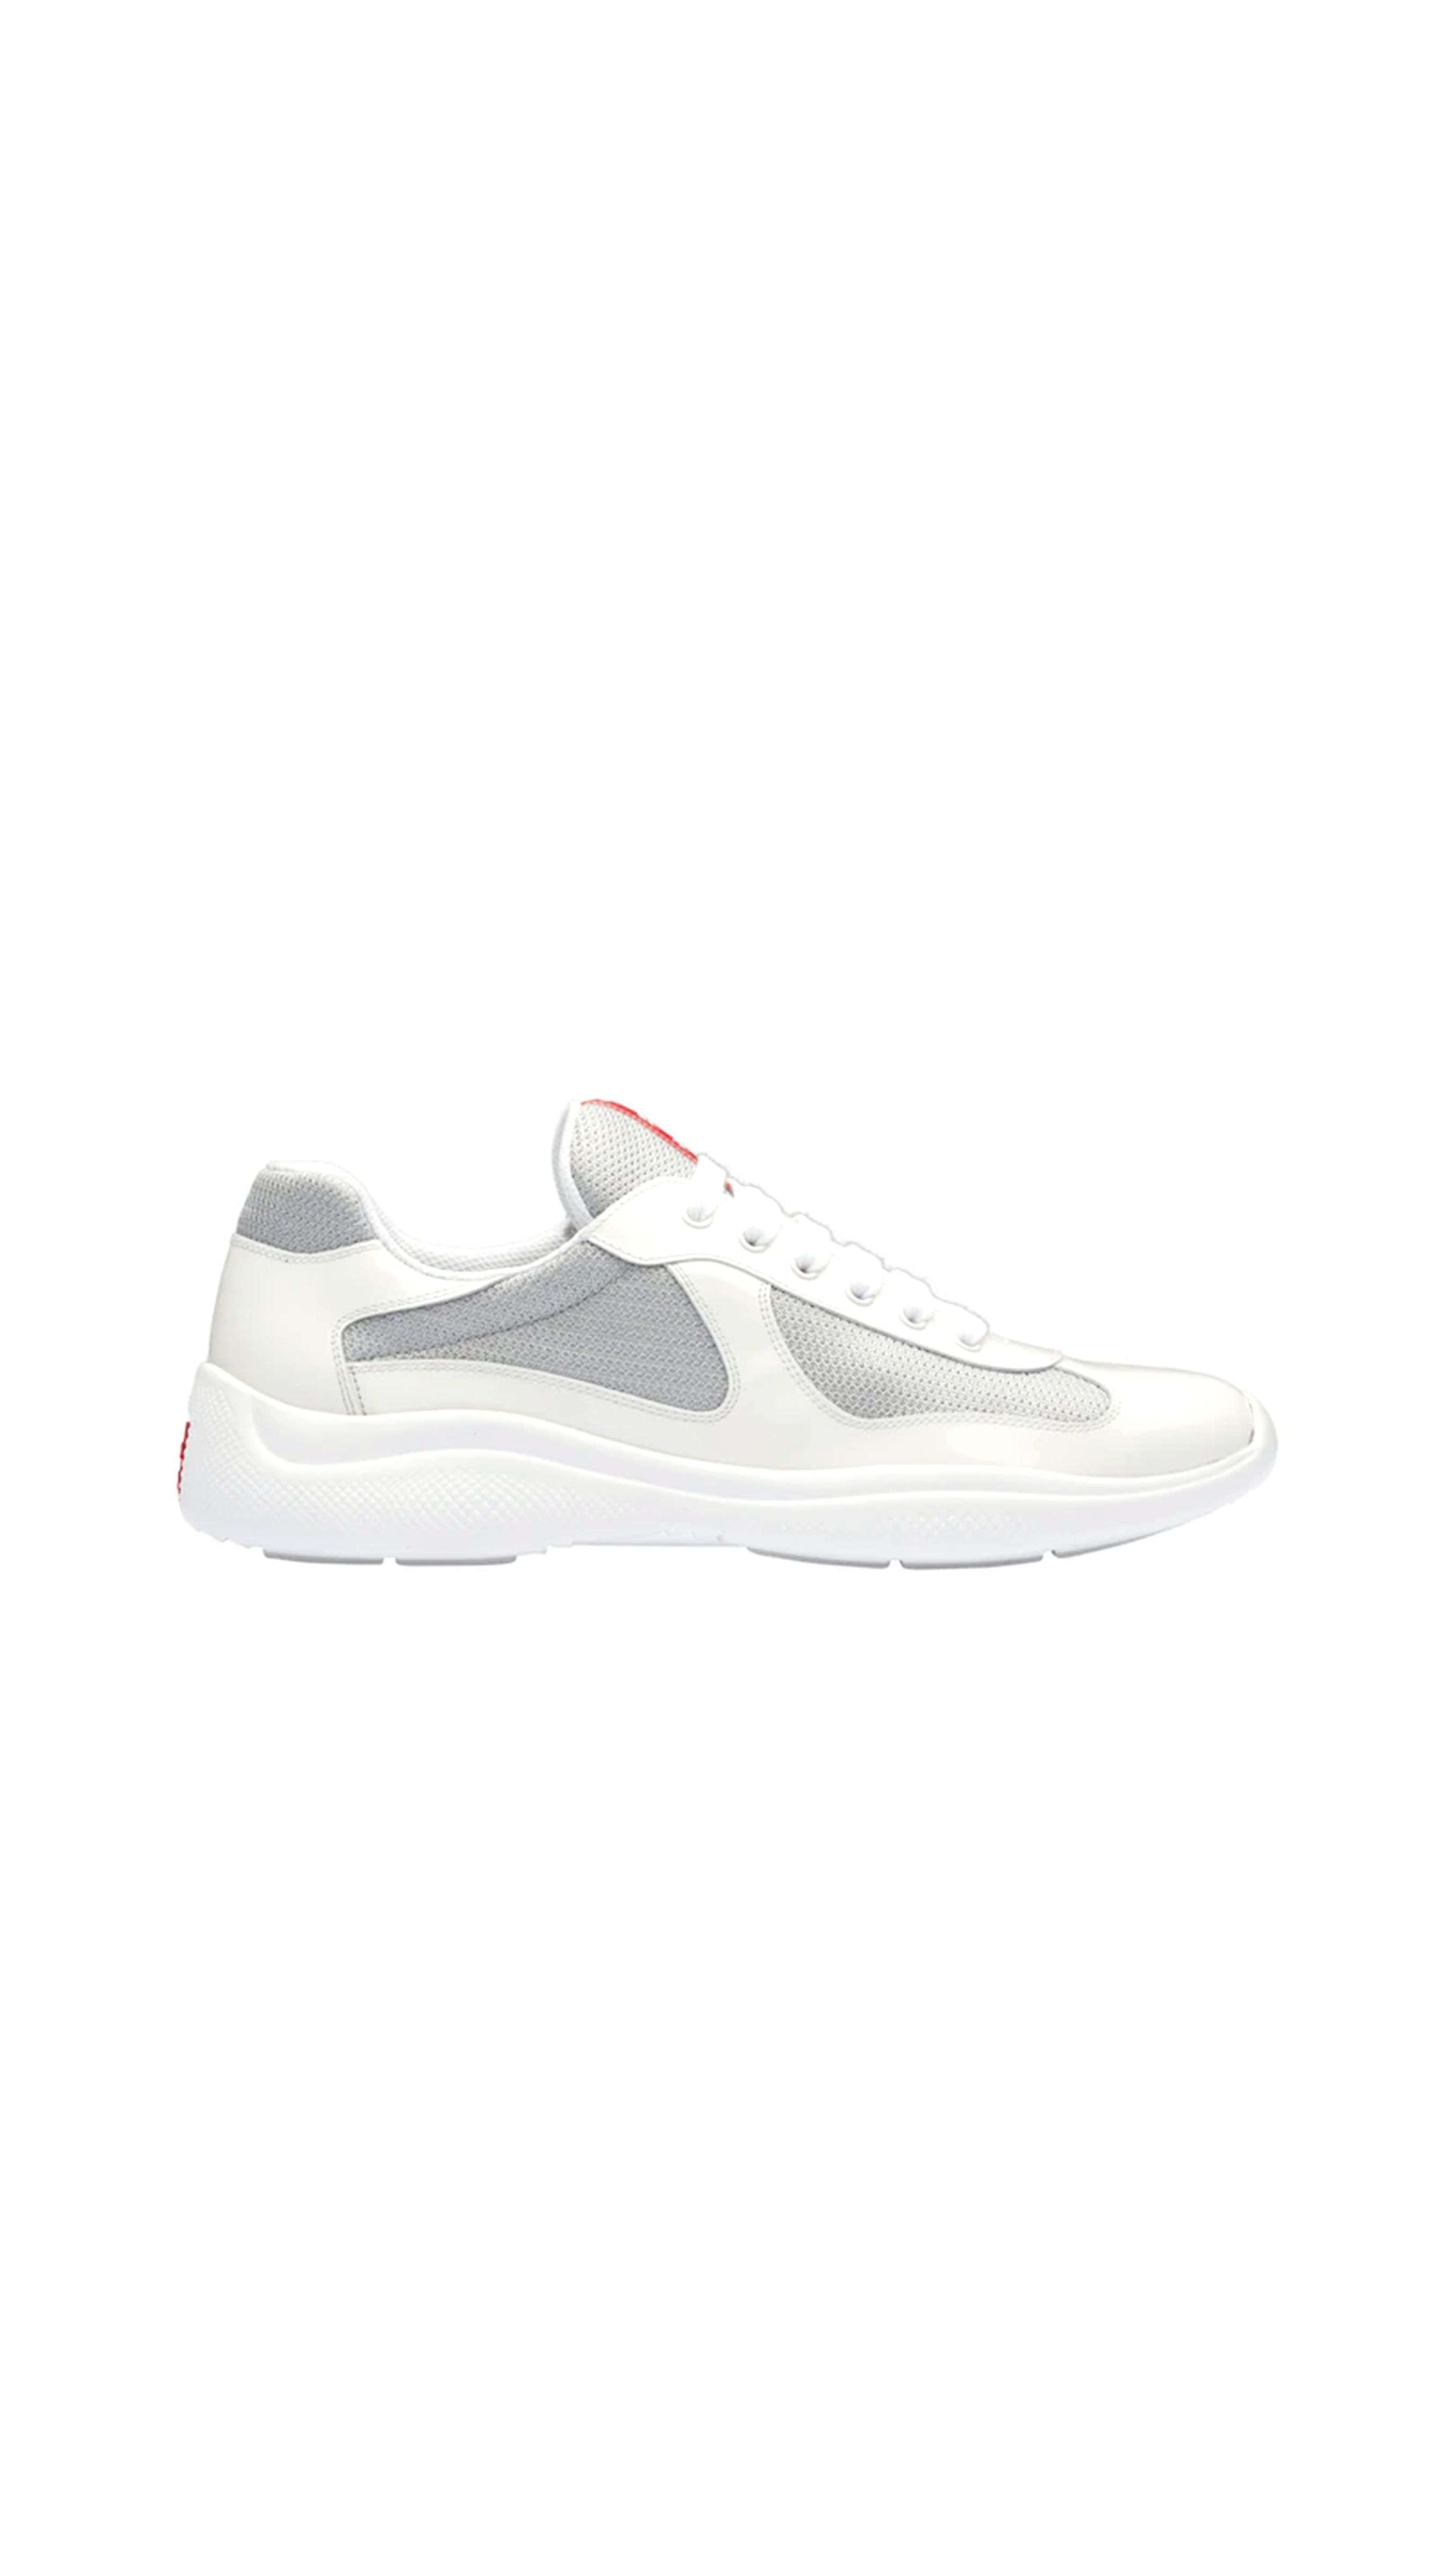 America's Cup Sneakers - White/Sliver